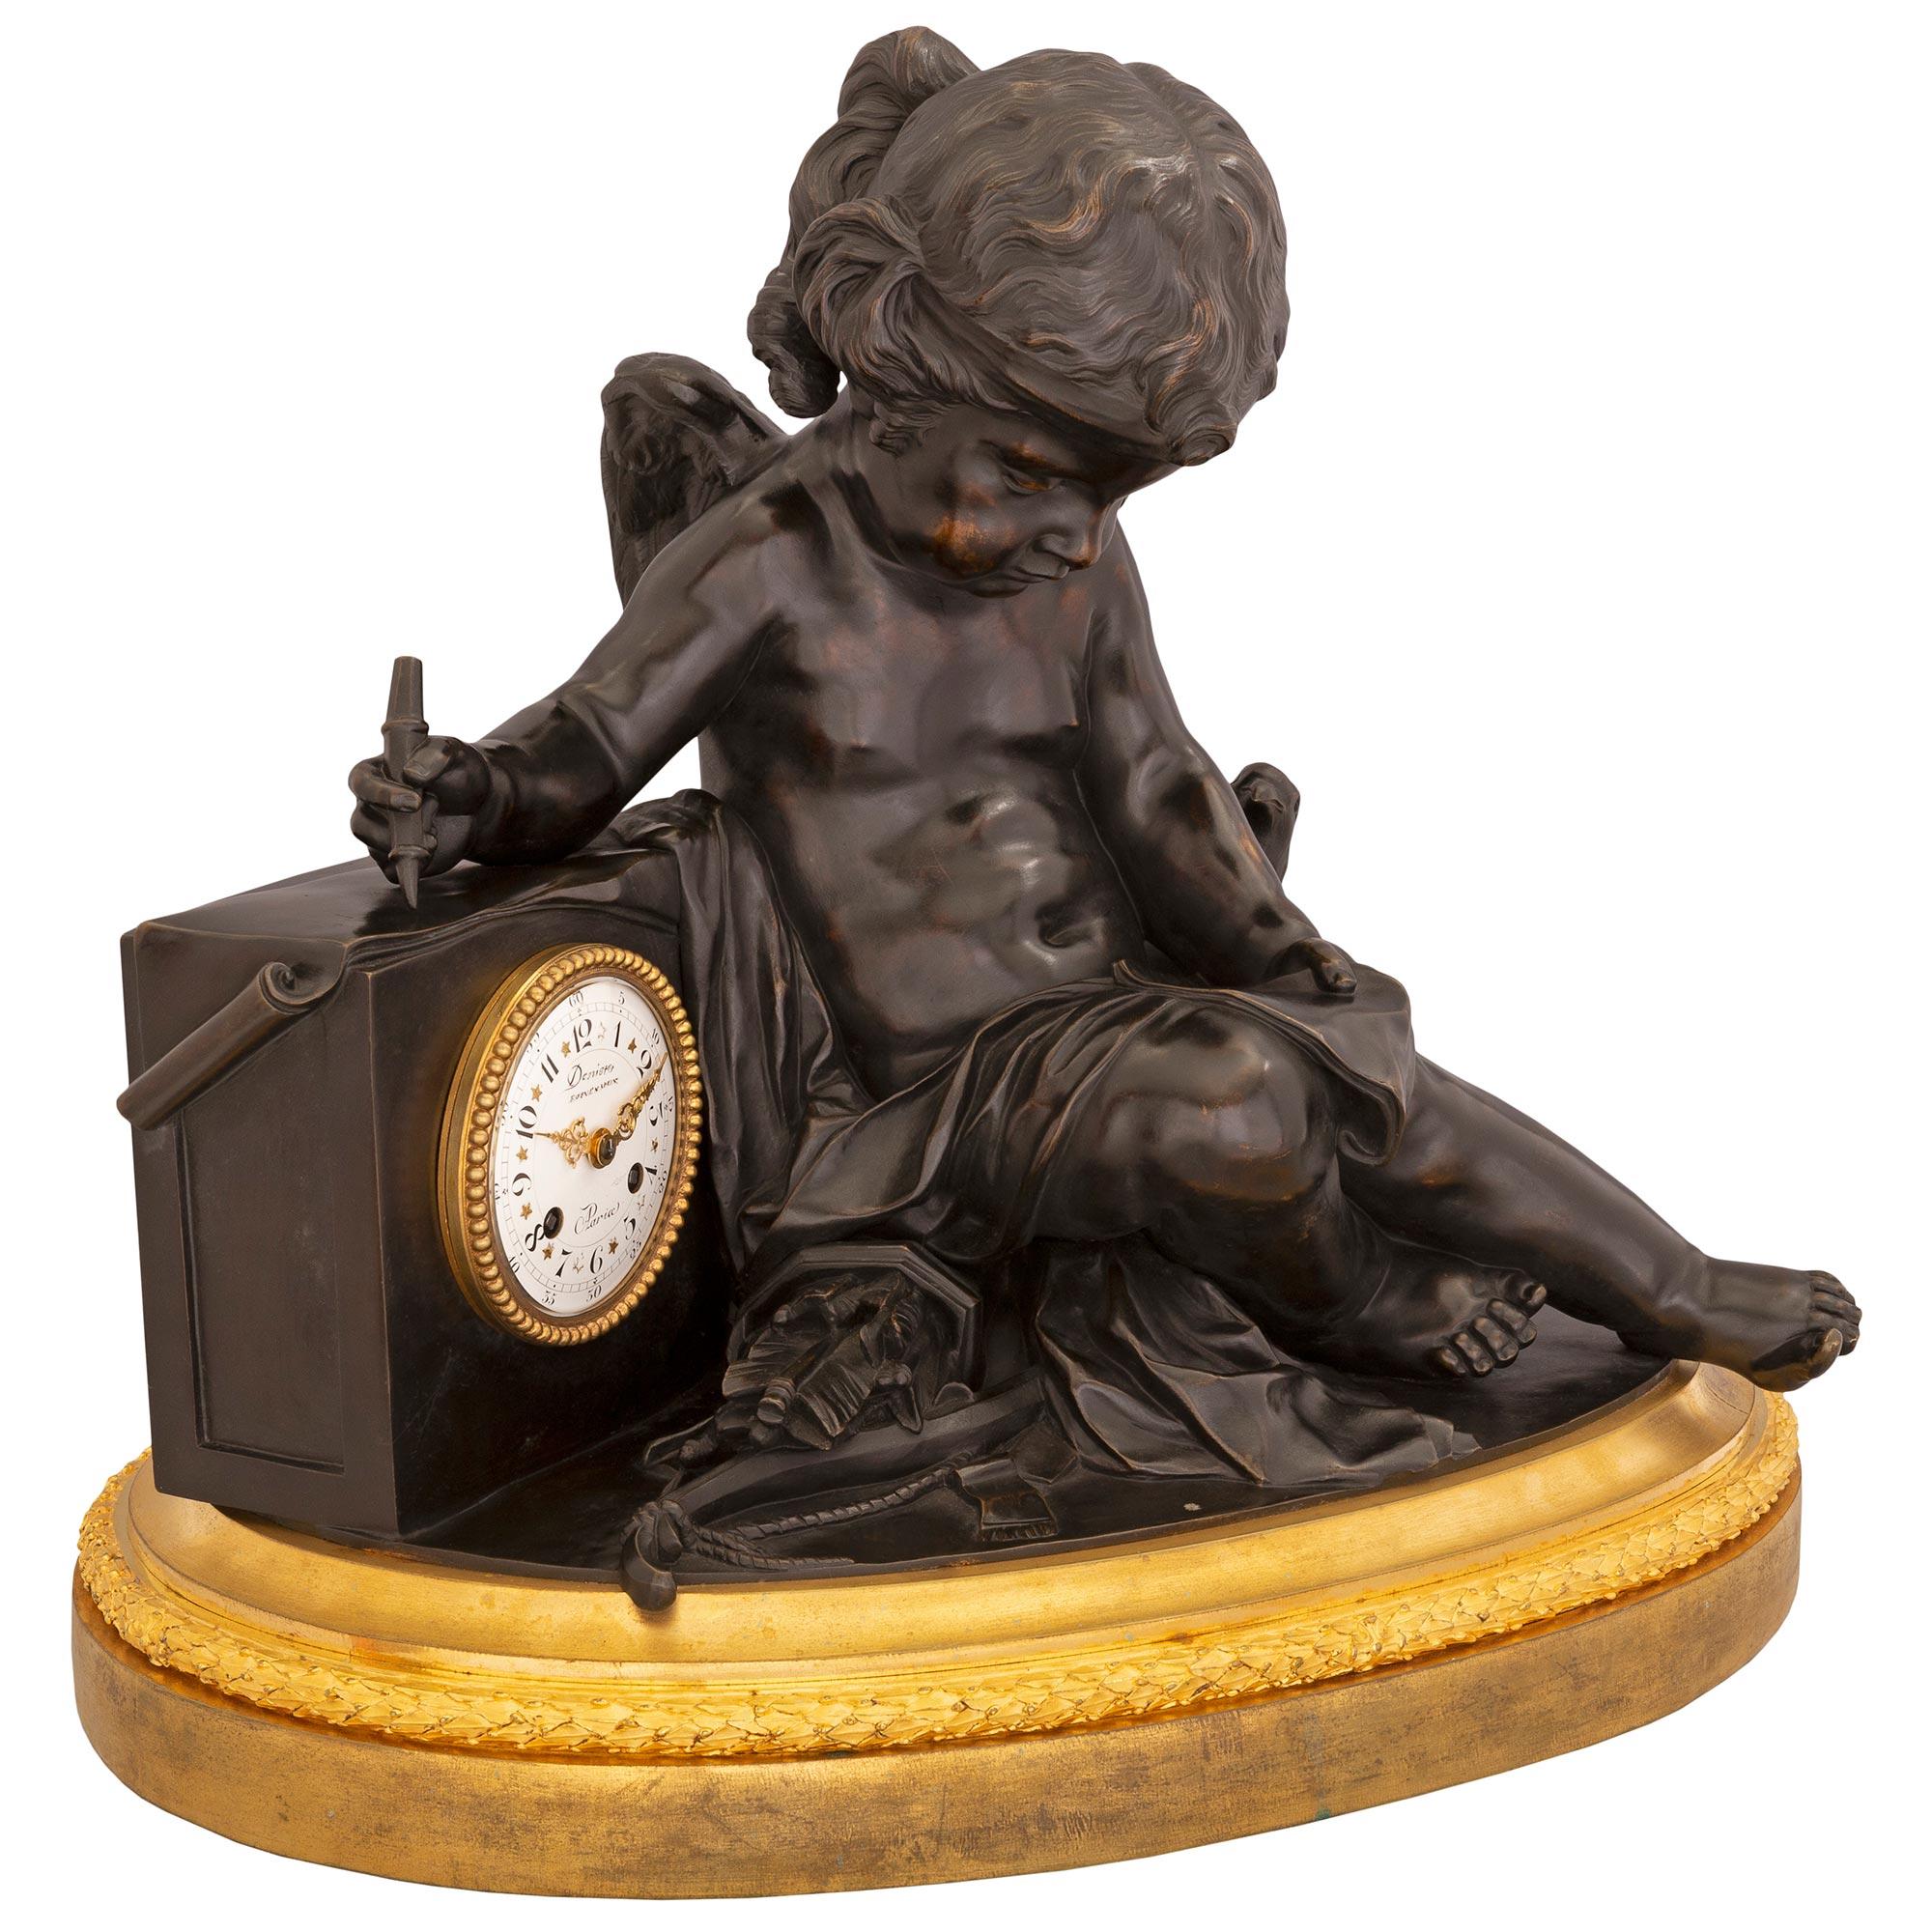 A charming and extremely high quality French 19th century Louis XVI st. ormolu and patinated bronze clock, signed Denière. The clock is raised by a fine oval shaped ormolu base with a richly chased wrap around berried laurel band and mottled border.